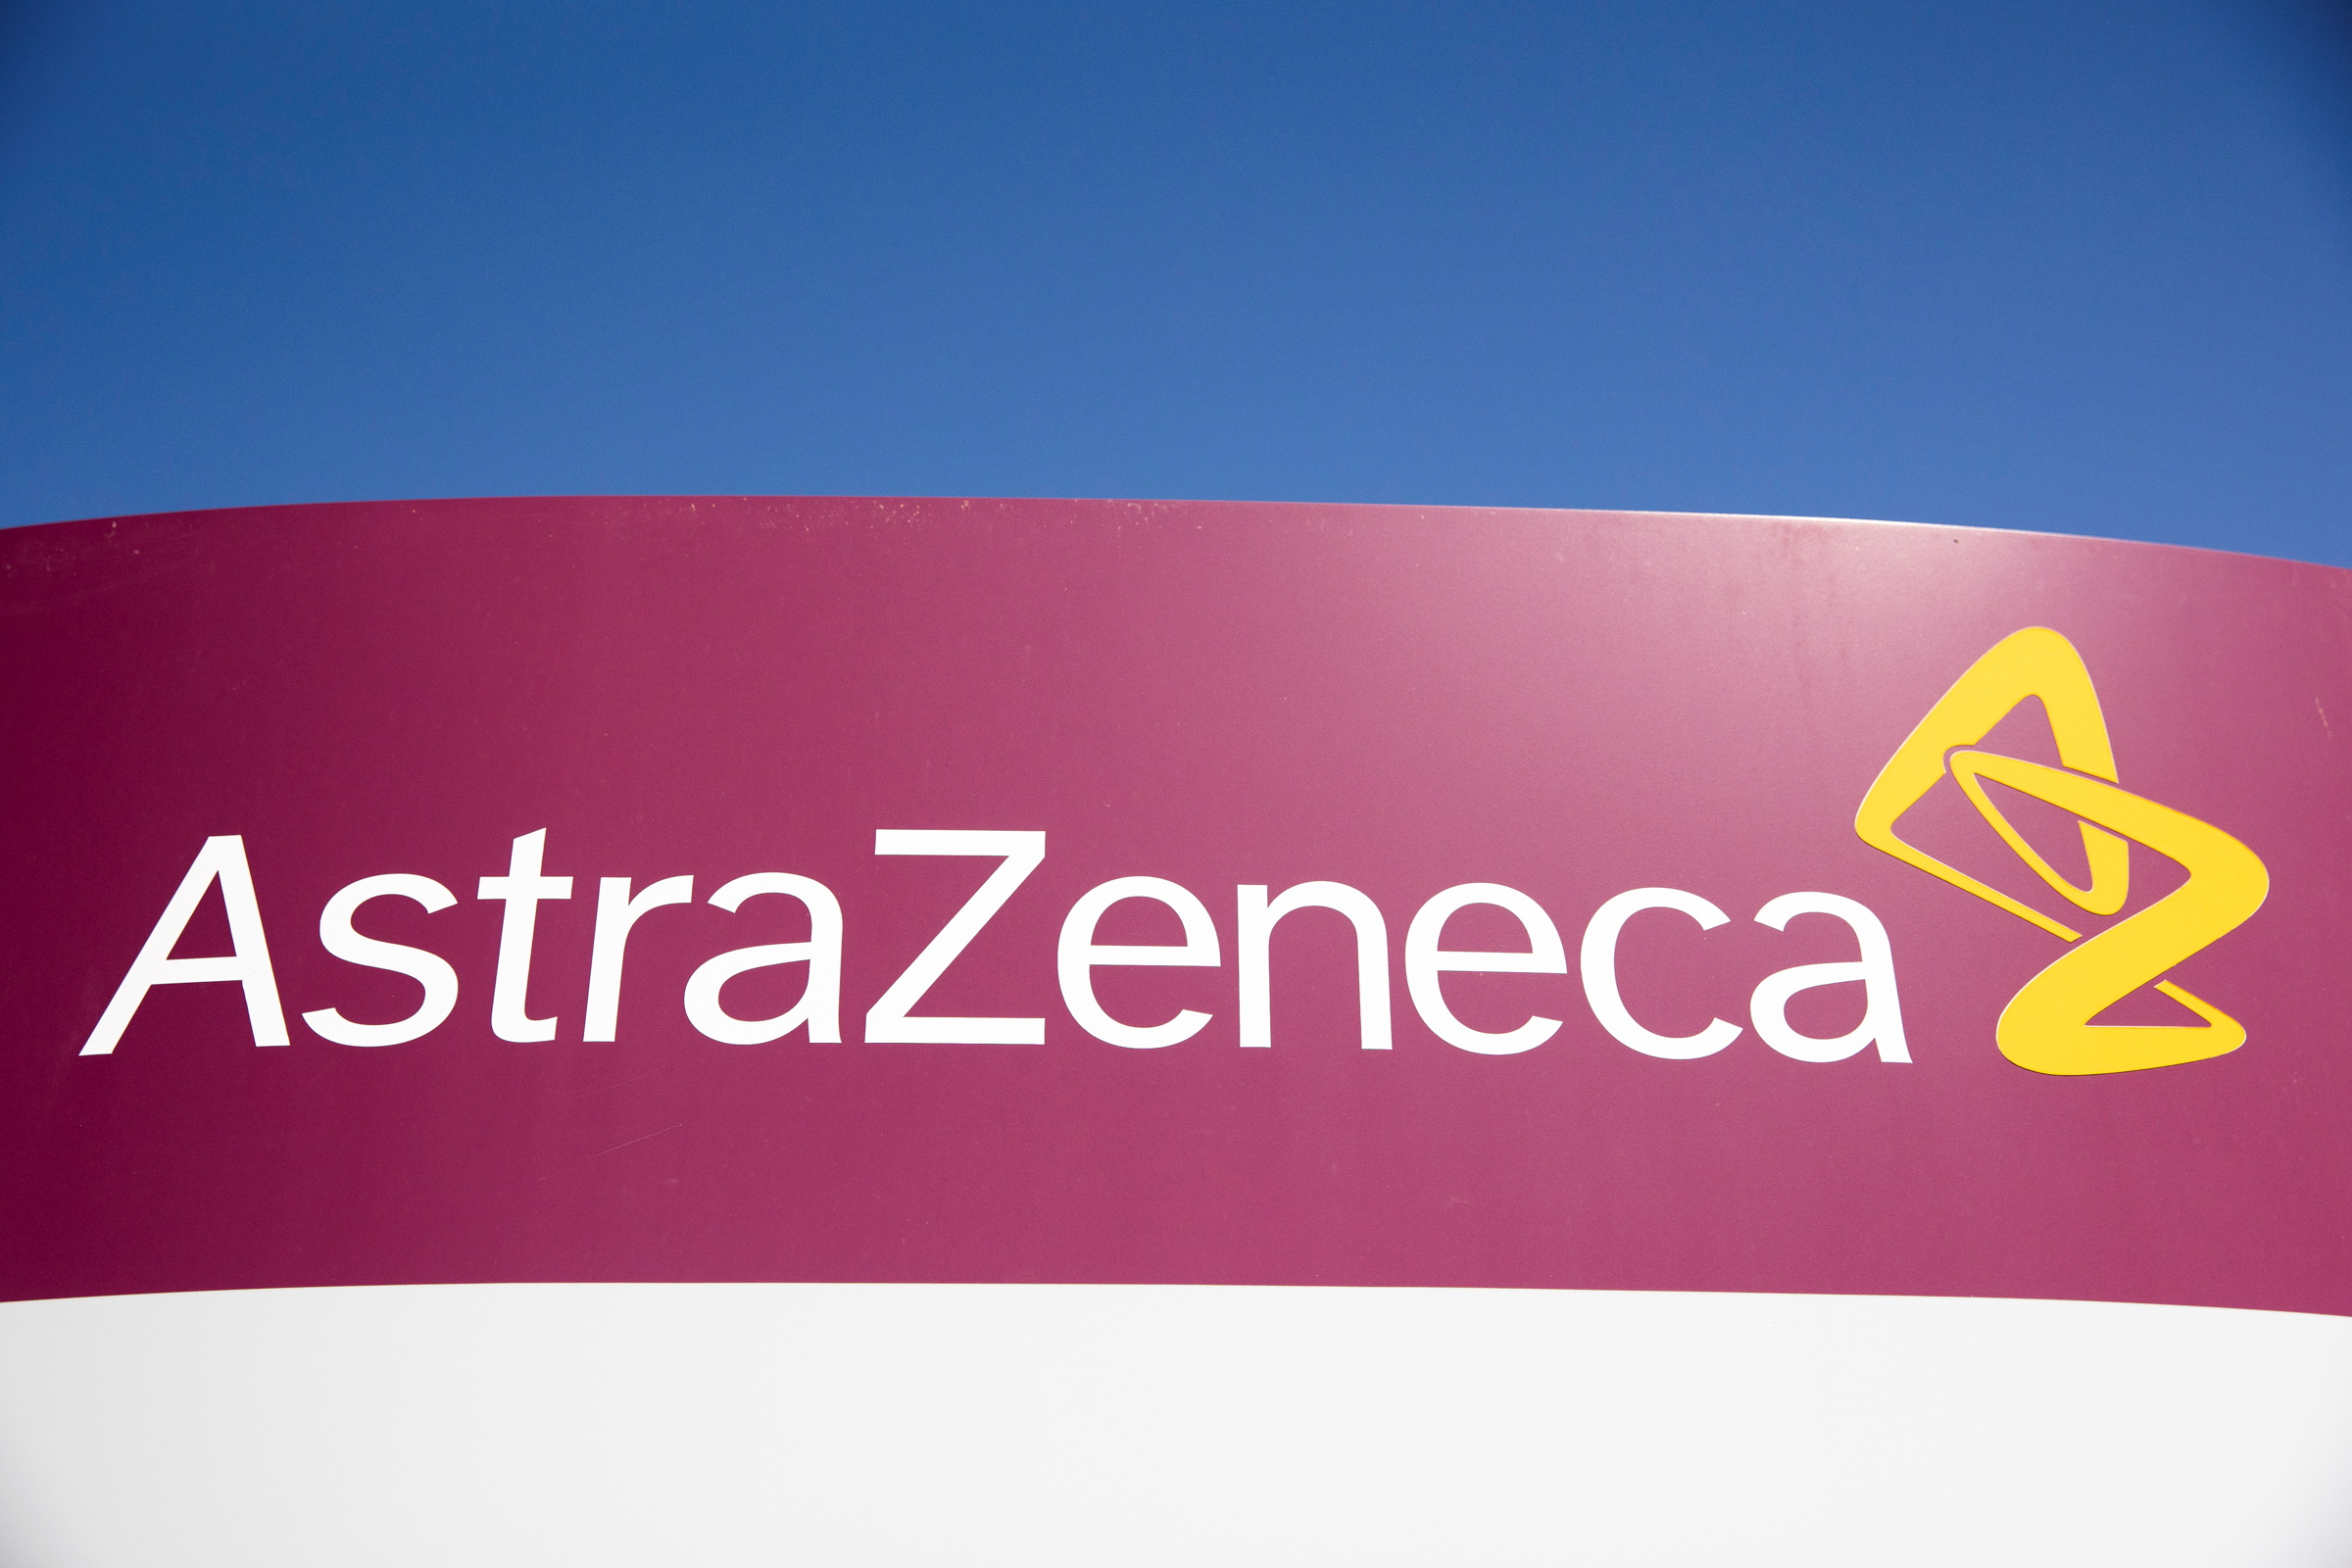 AstraZeneca's drug Tagrisso gets China nod for early lung cancer Reuters